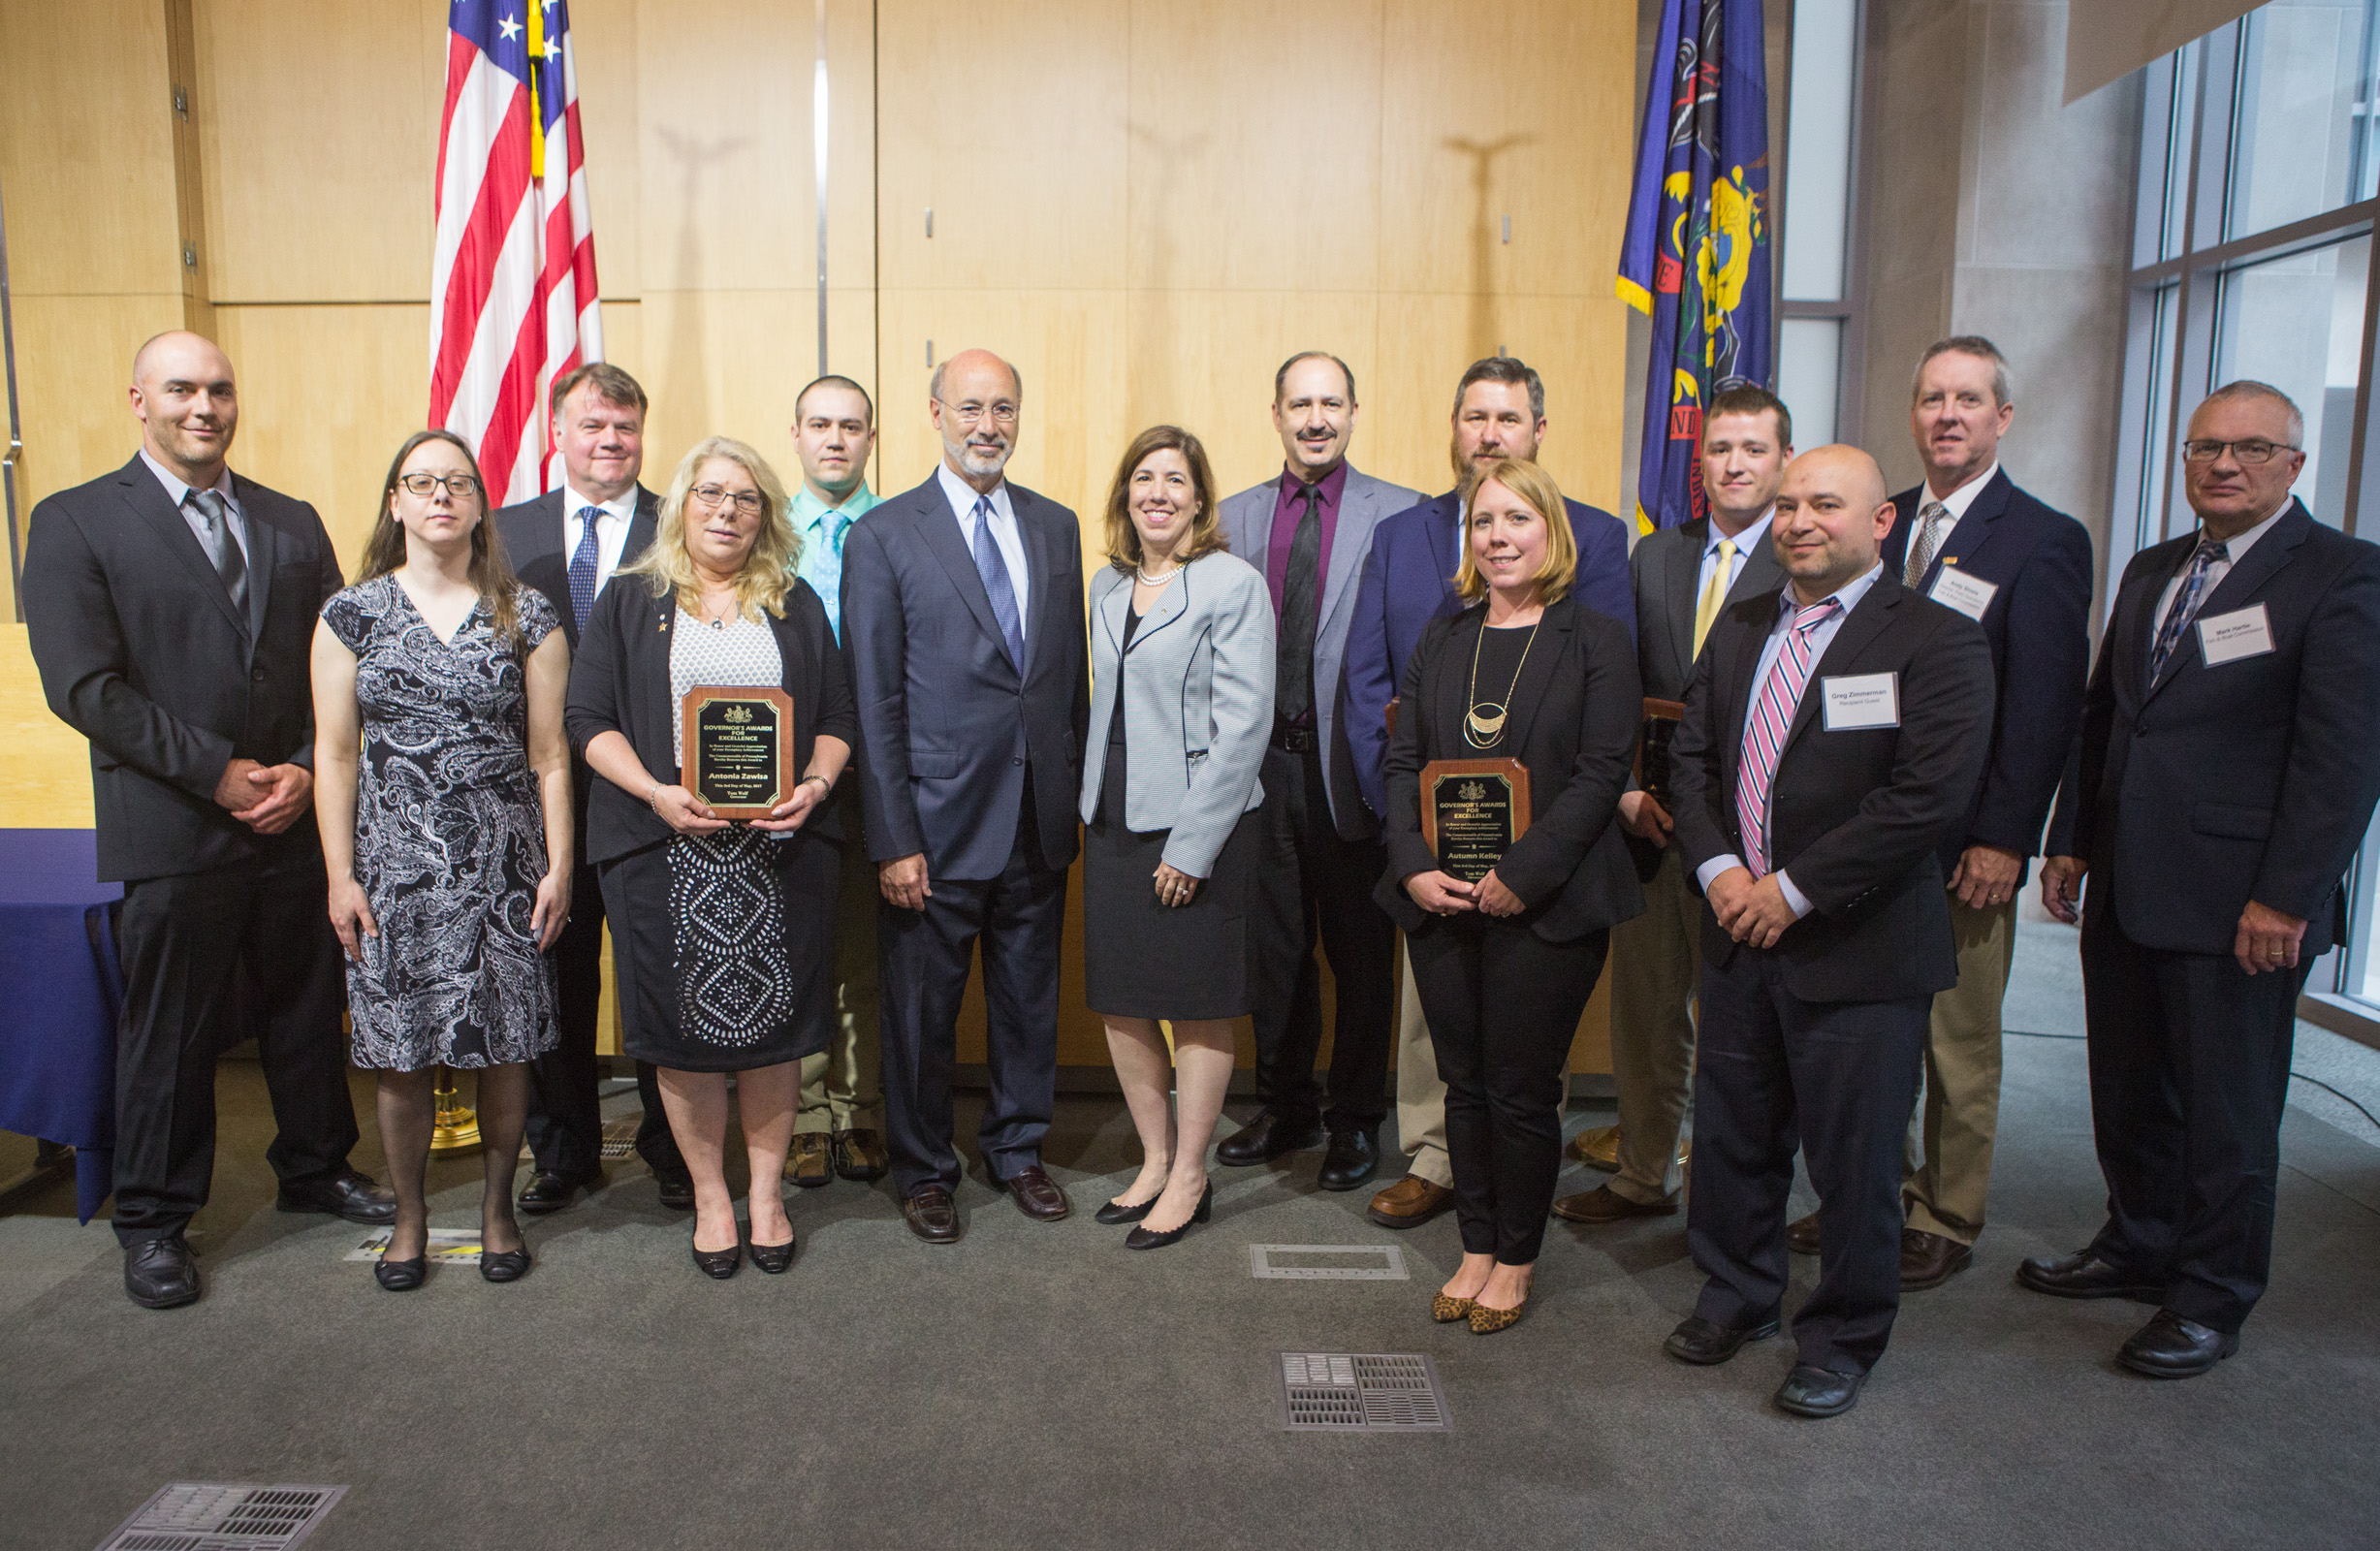 The recipients of a 2017 Governor's Award of Excellence pose with Governor Tom Wolf and PennDOT Secretary Leslie S. Richards.